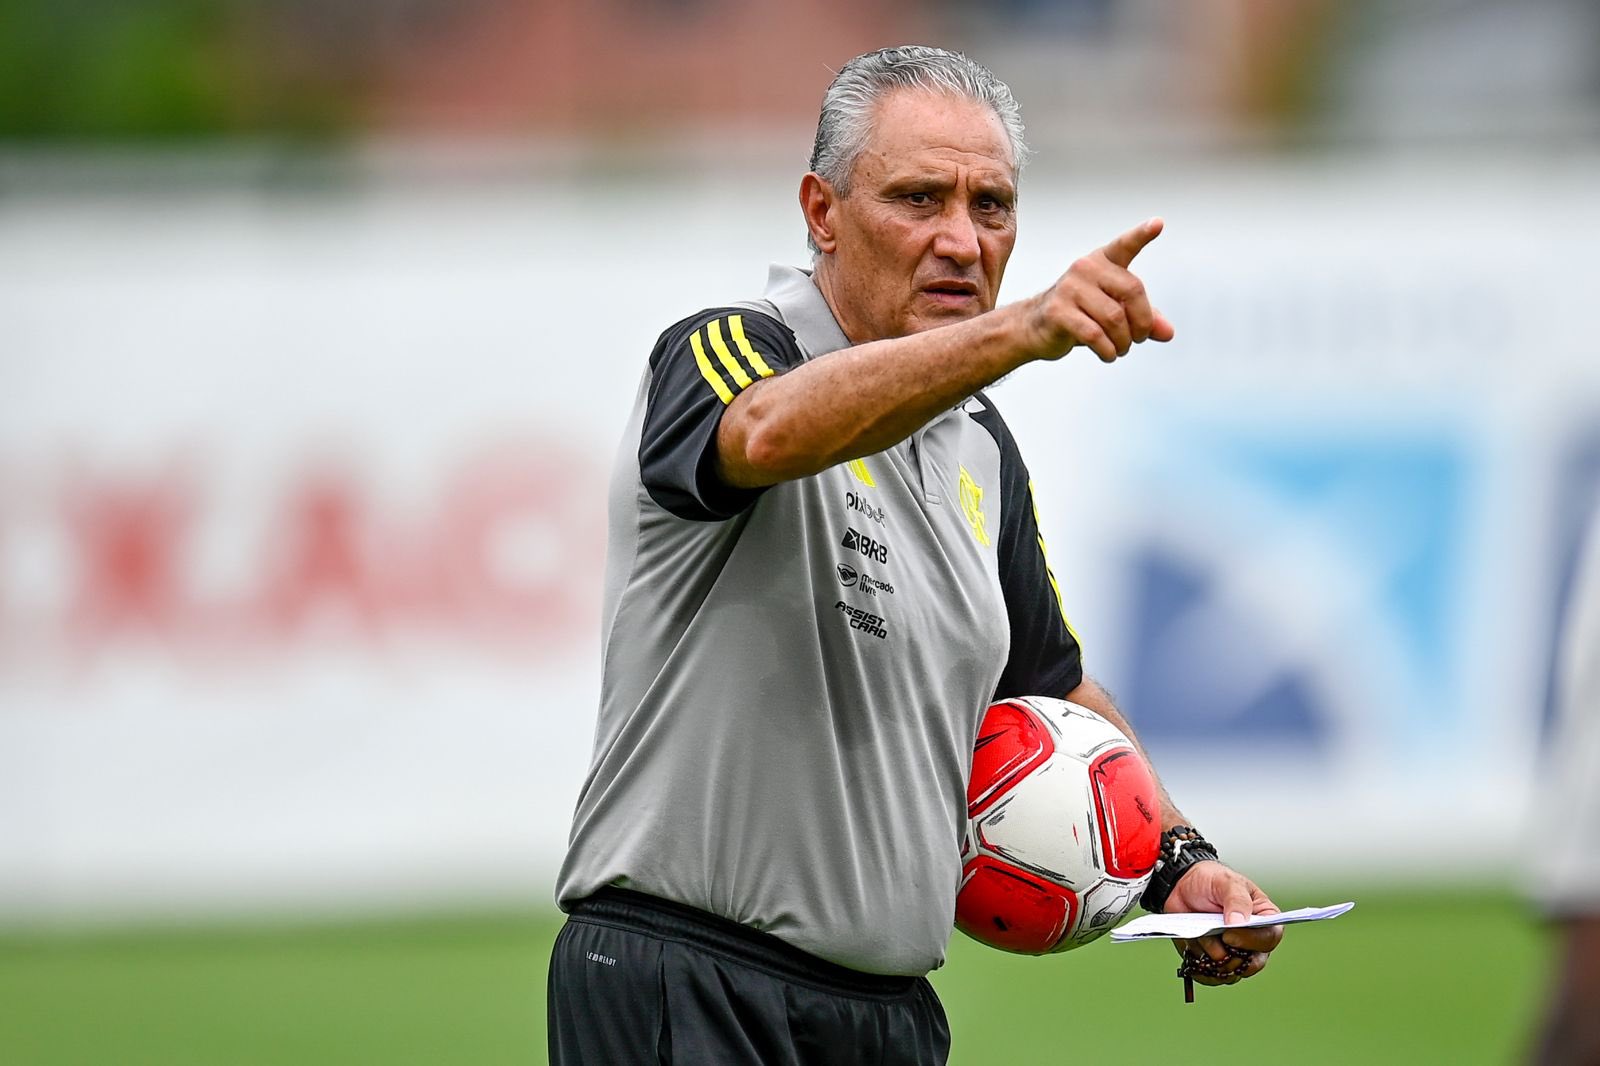 AFTER ELECTING THE CARIOCA CHAMPIONSHIP AS THE MOST DIFFICULT STATE CHAMPIONSHIP, TITE, FLAMENGO COACH, SAYS: "I EXPRESSED MYSELF WRONG..."